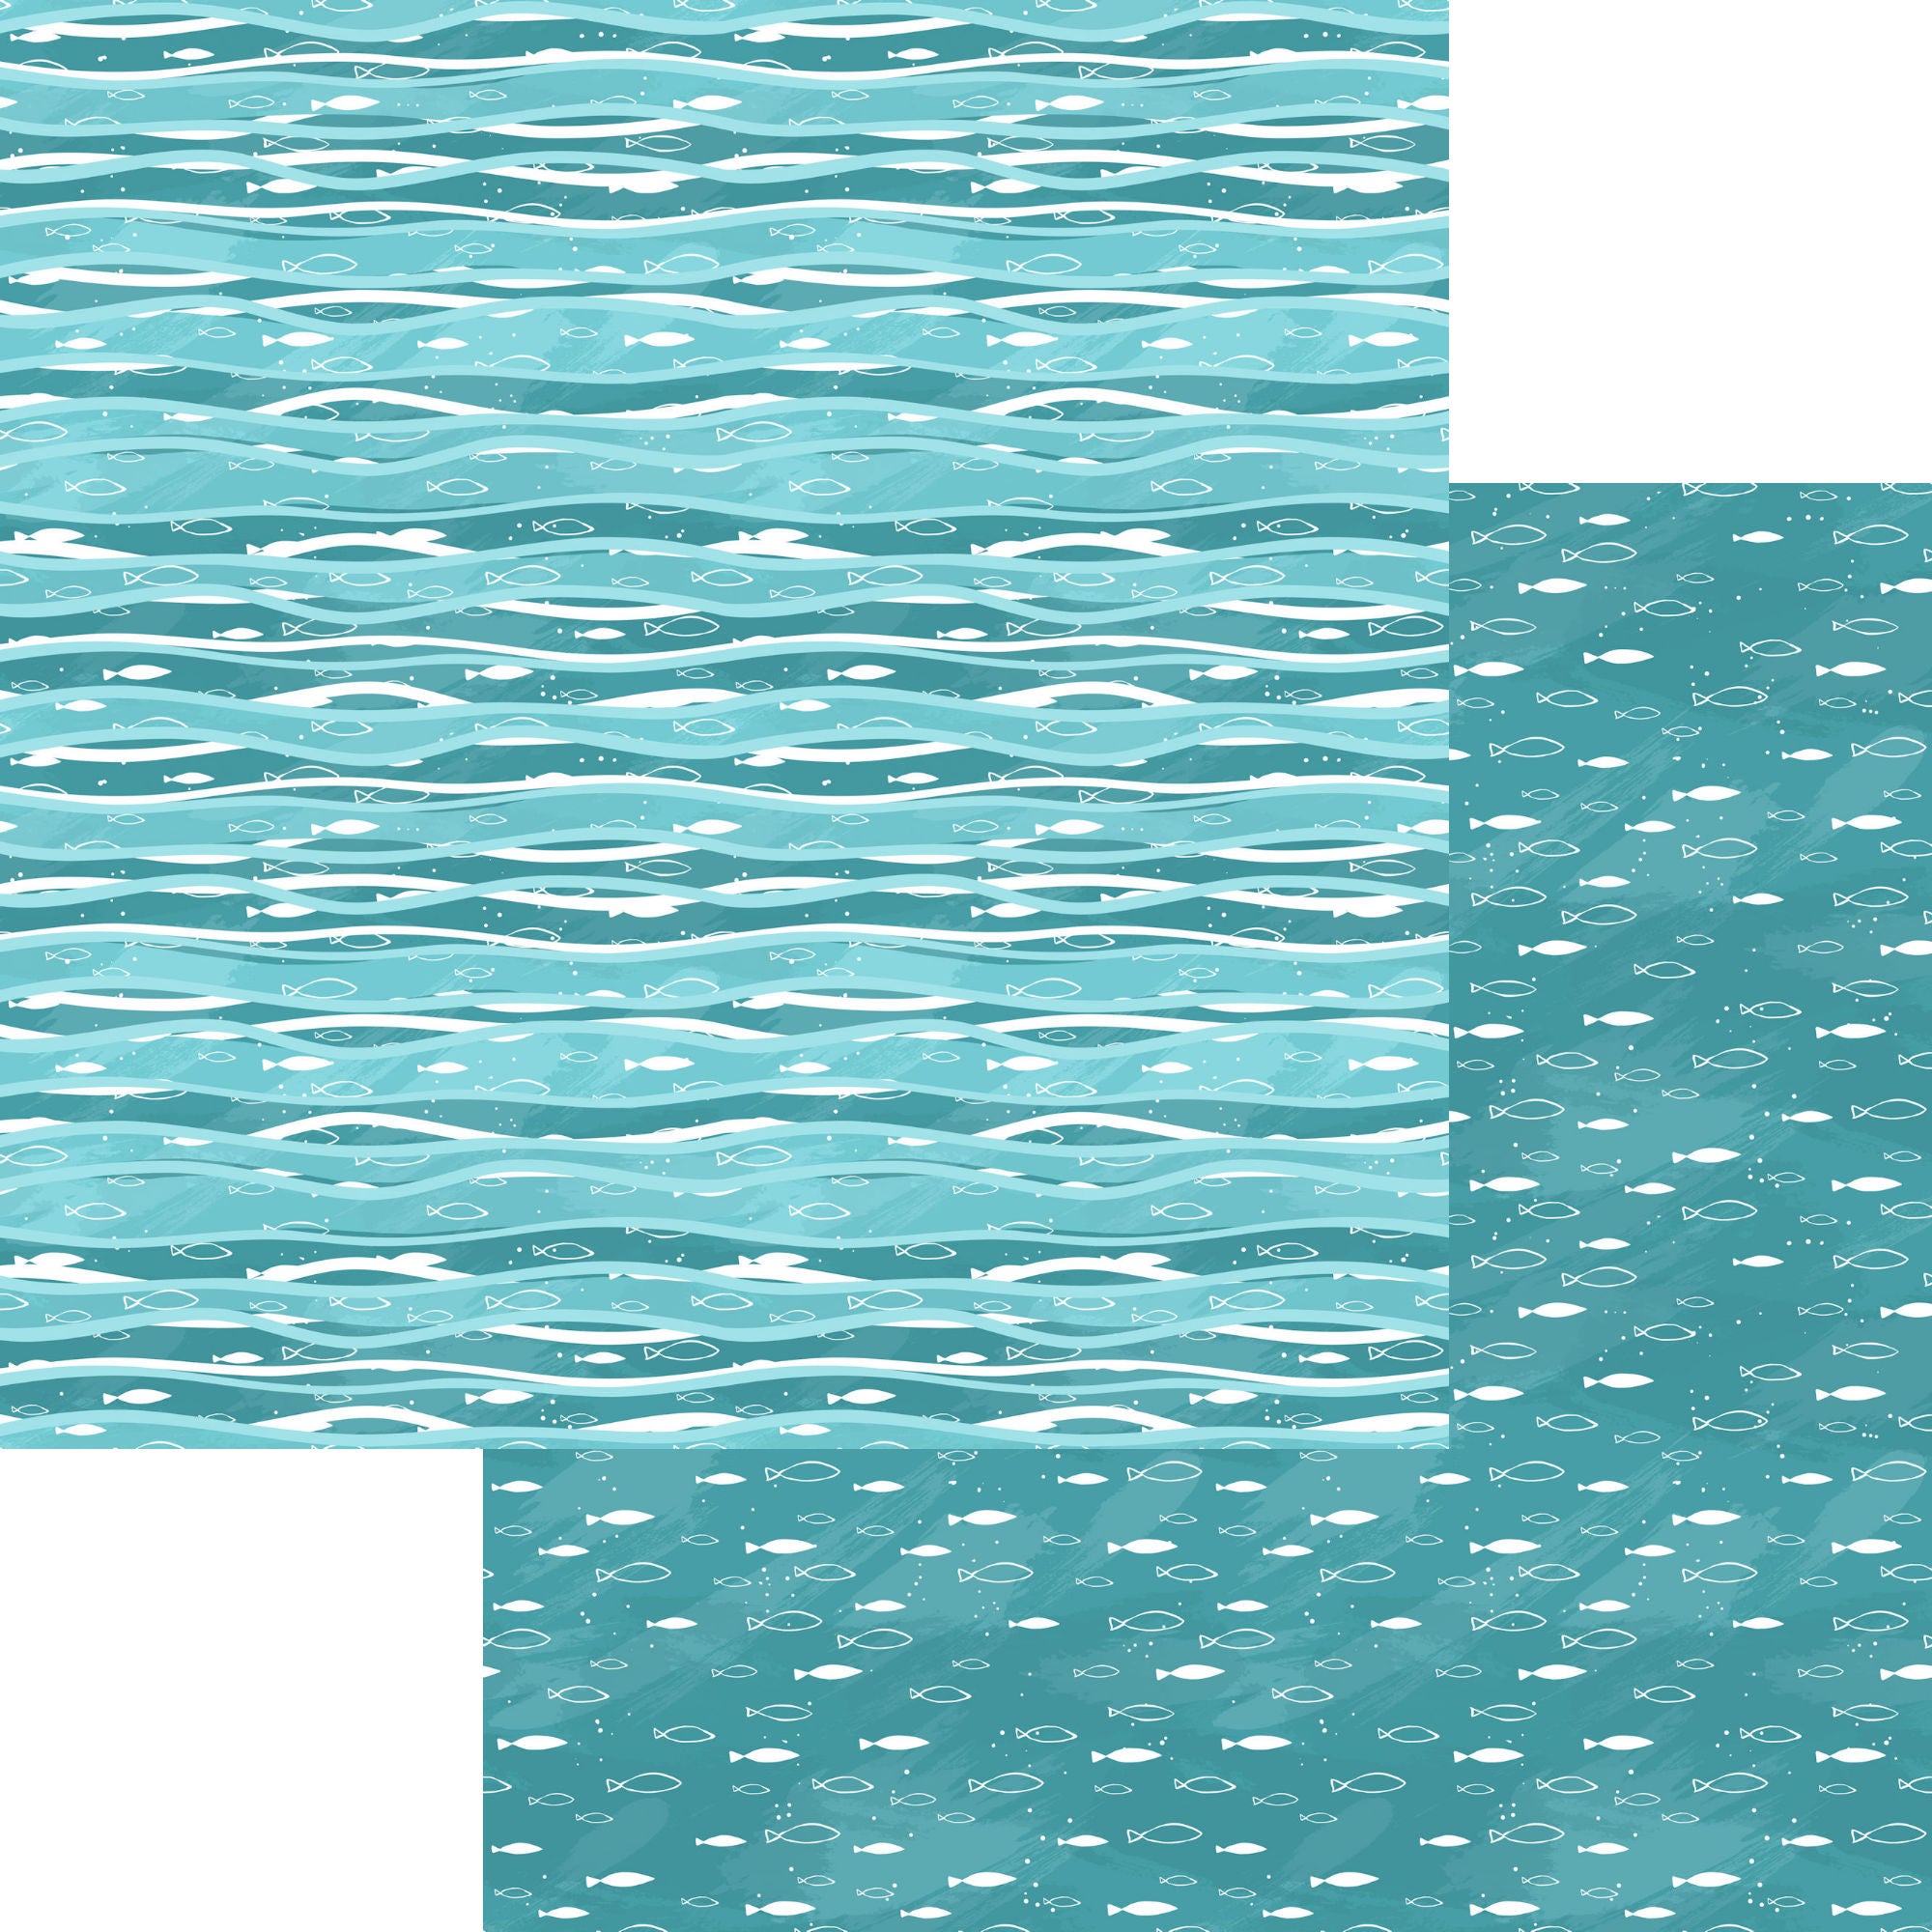 Nautical Summer Collection Wavy Water 12 x 12 Double-Sided Scrapbook Paper by SSC Designs